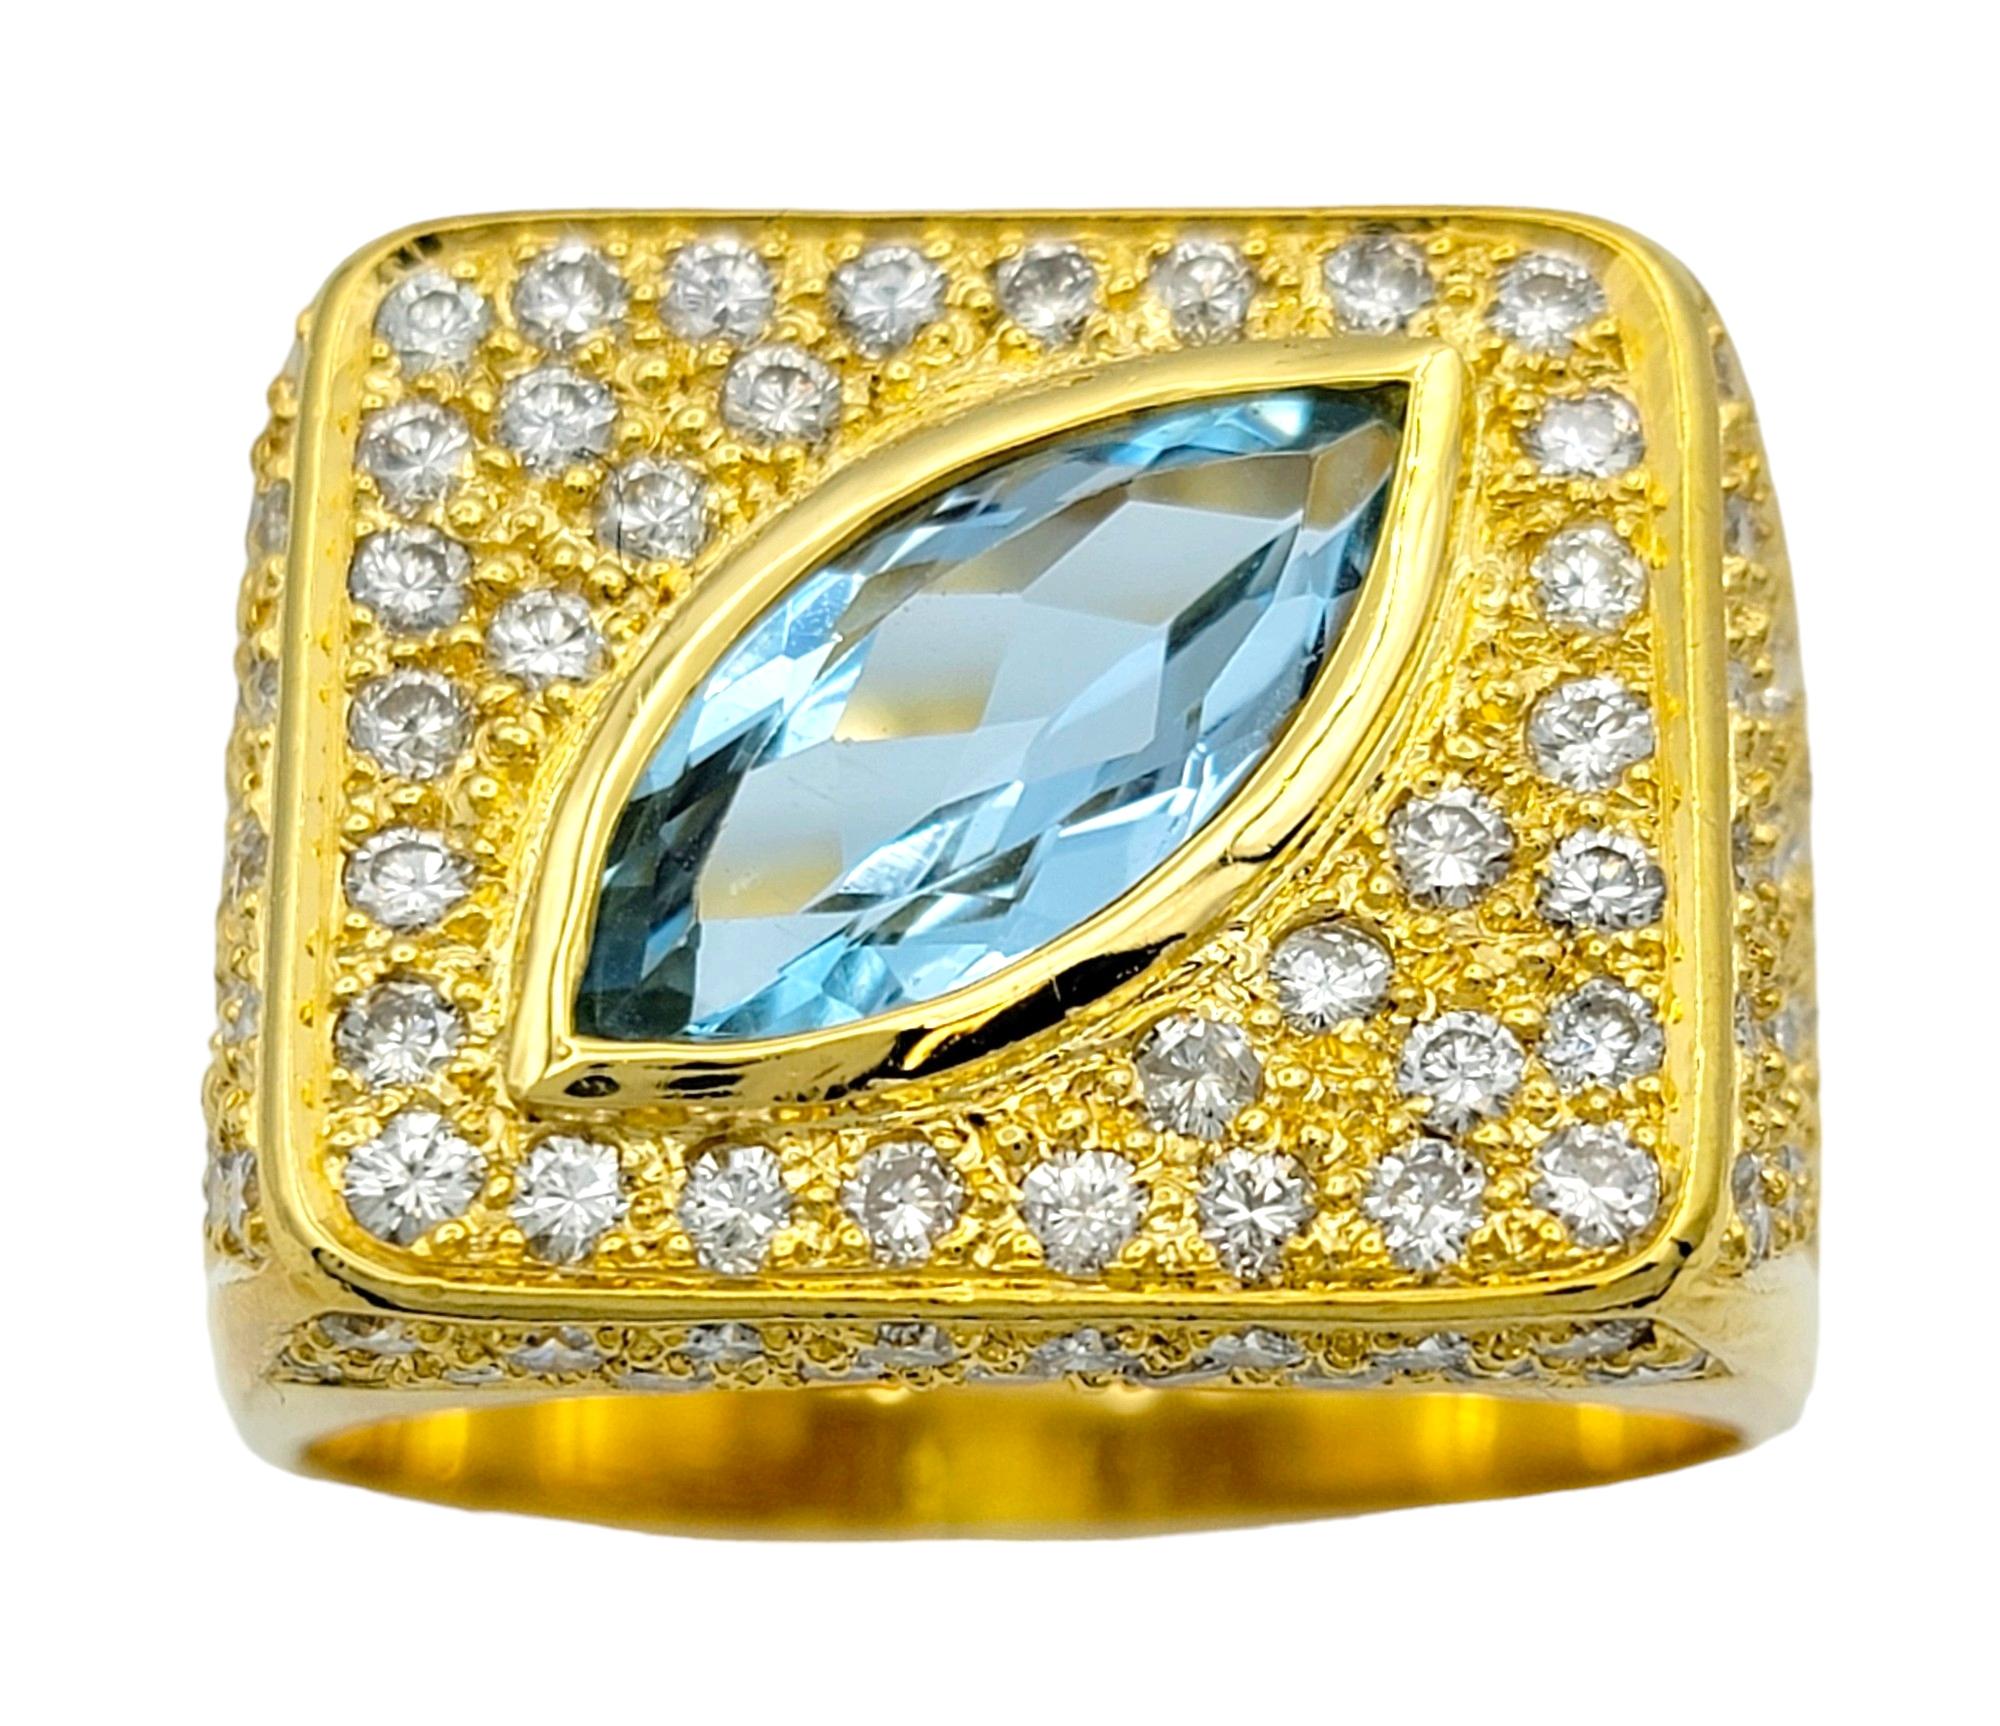 Ring size: 12.75

Make a bold statement with this striking 18 karat yellow gold squared cocktail ring designed by Sophie d'Agon. At its core lies a captivating marquise-cut aquamarine stone, bezel-set on a diagonal for a modern twist on classic